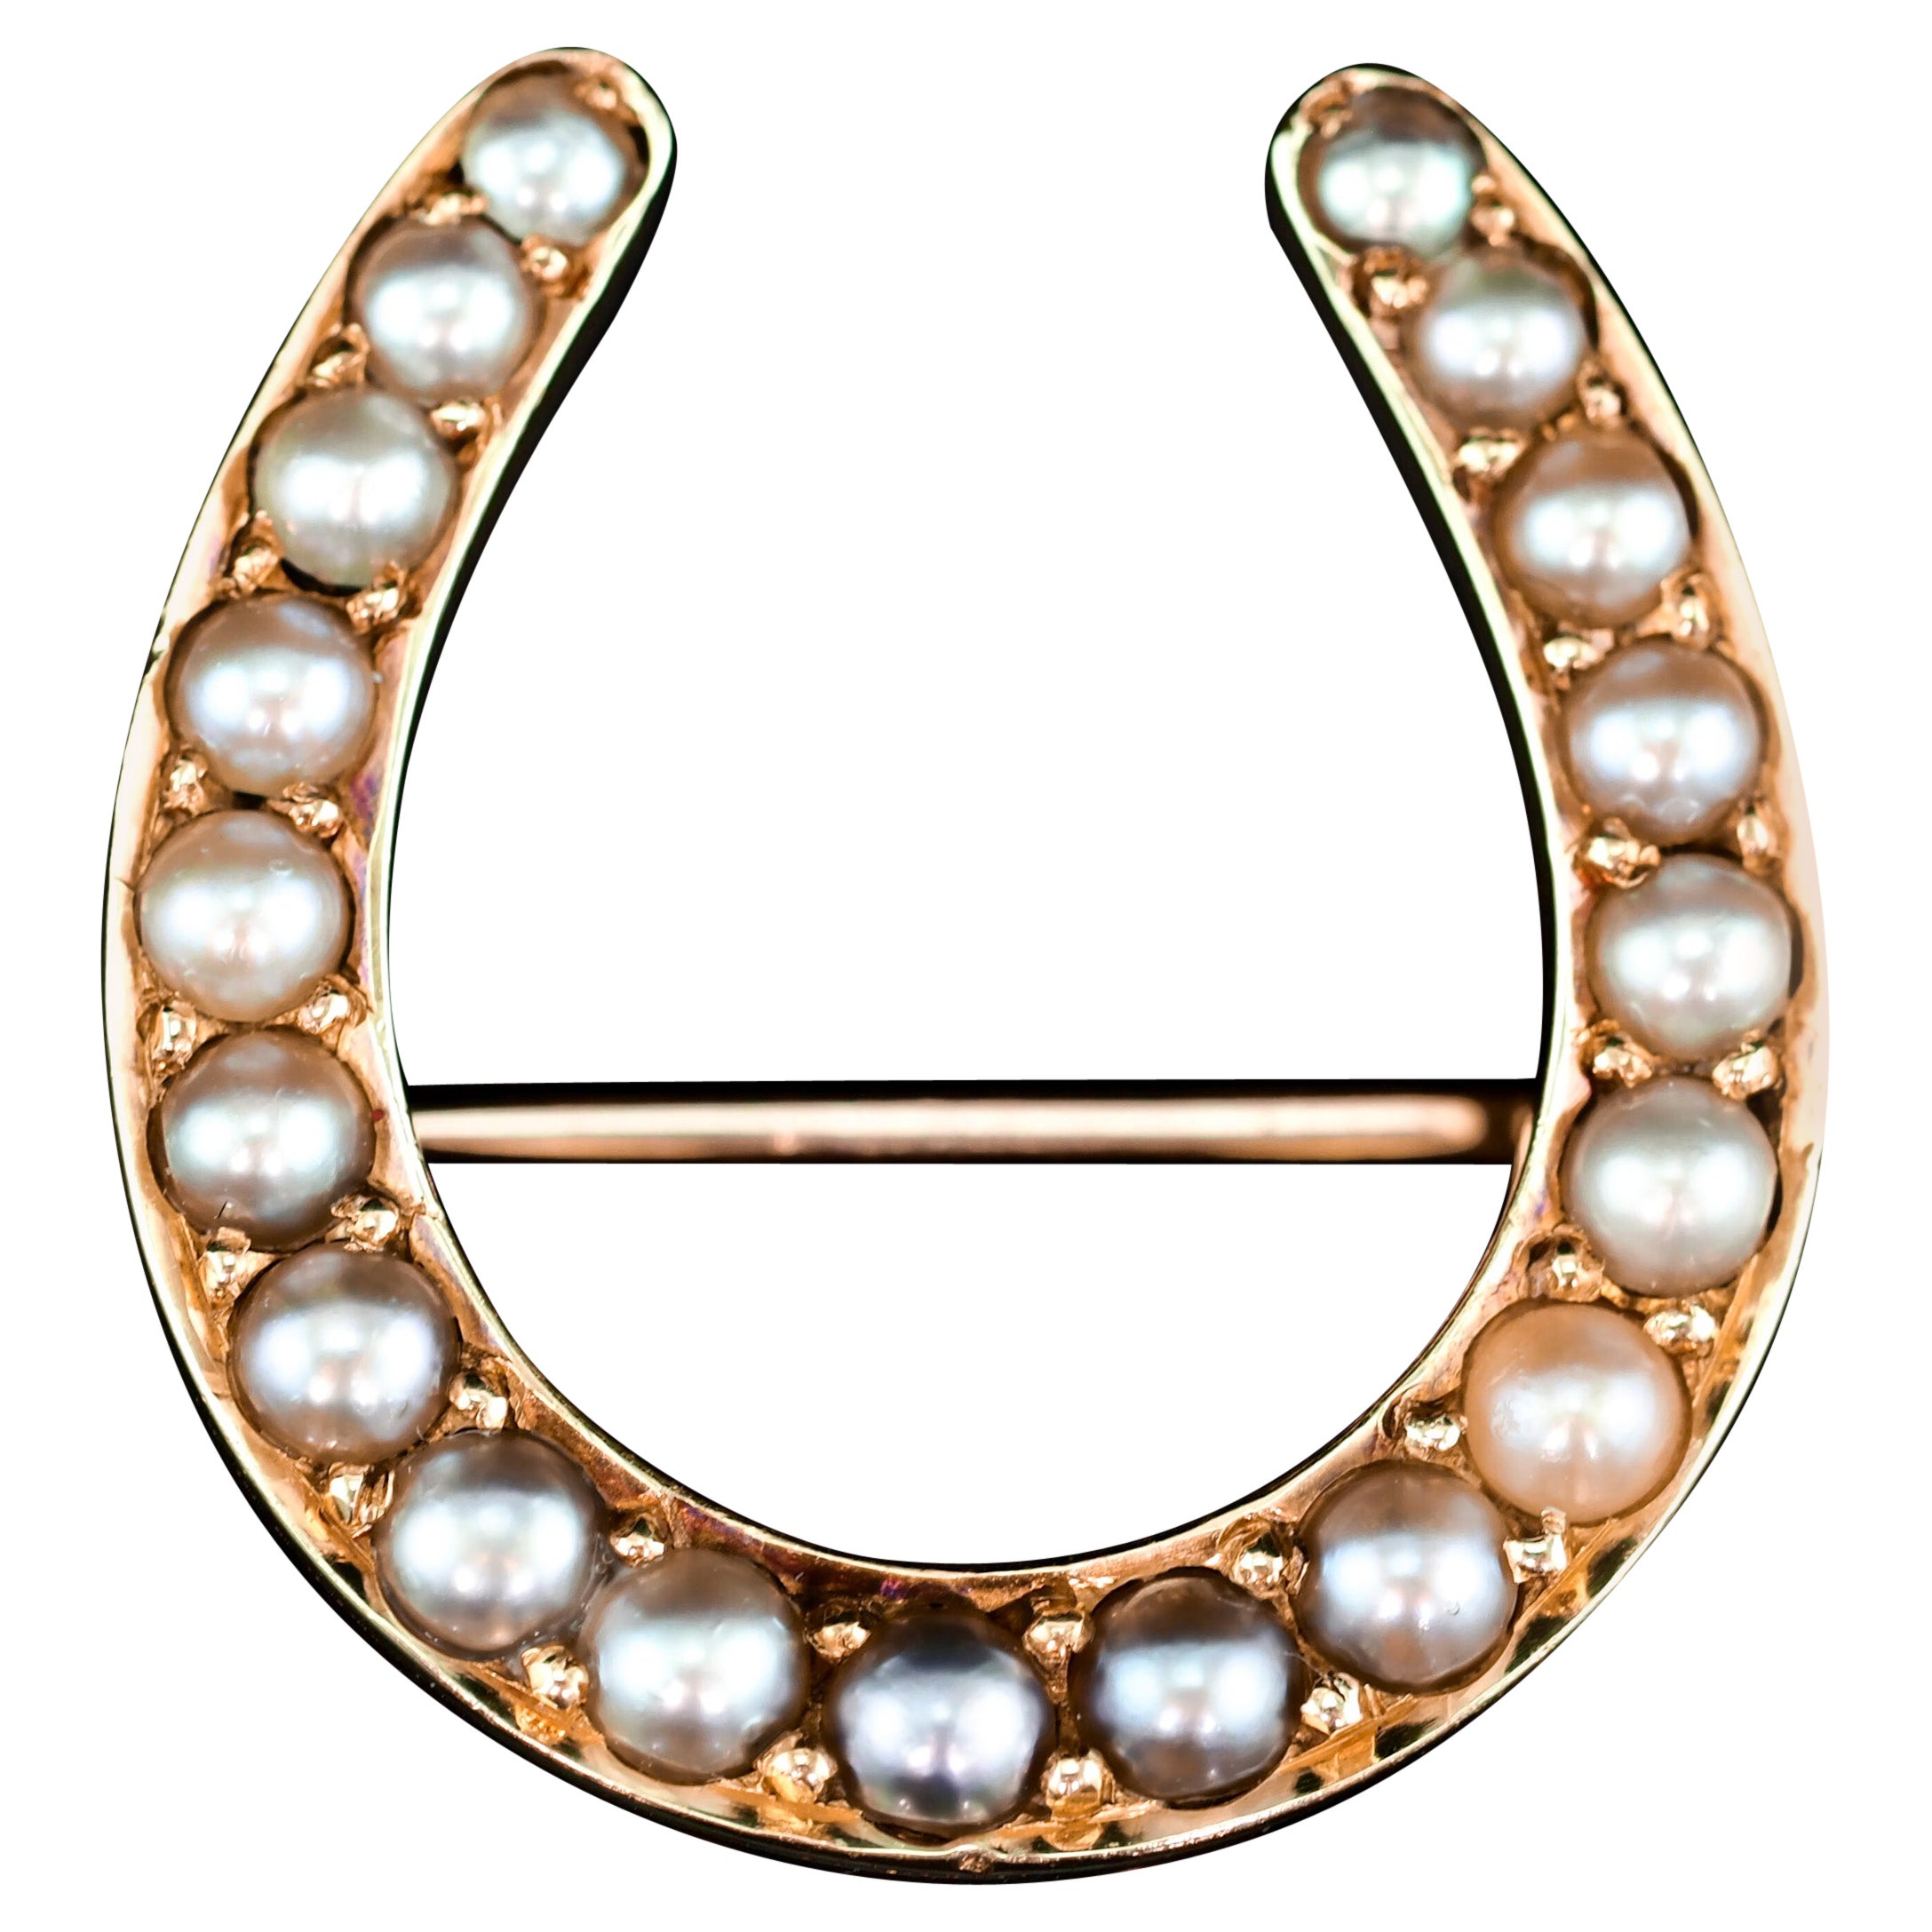 Antique Victorian 14k Gold Horseshoe Pearl Brooch/Pin - c.1860